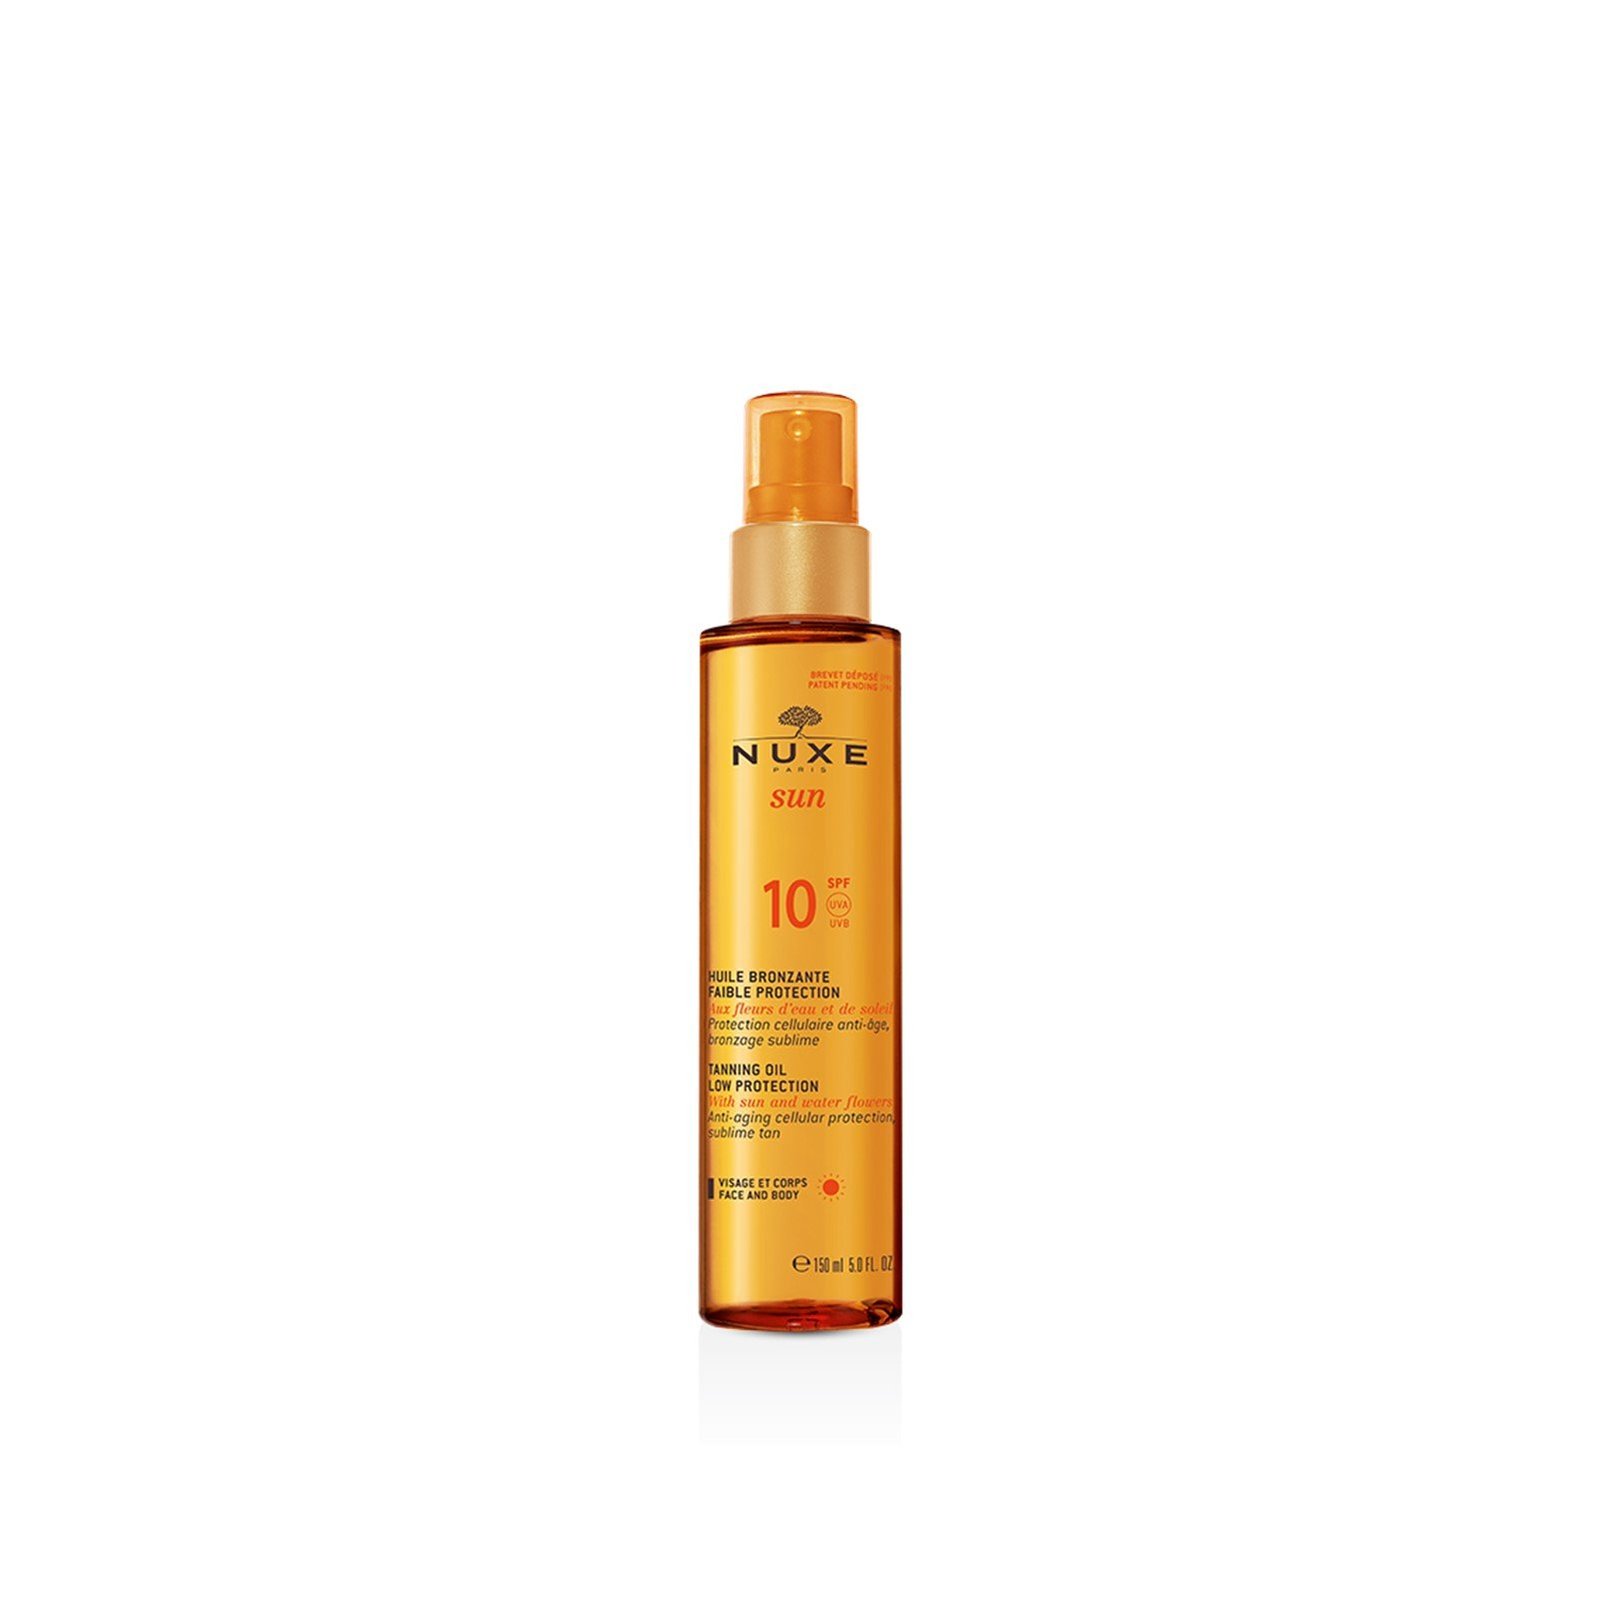 NUXE Sun Tanning Oil Low Protection for Face and Body SPF10 150ml